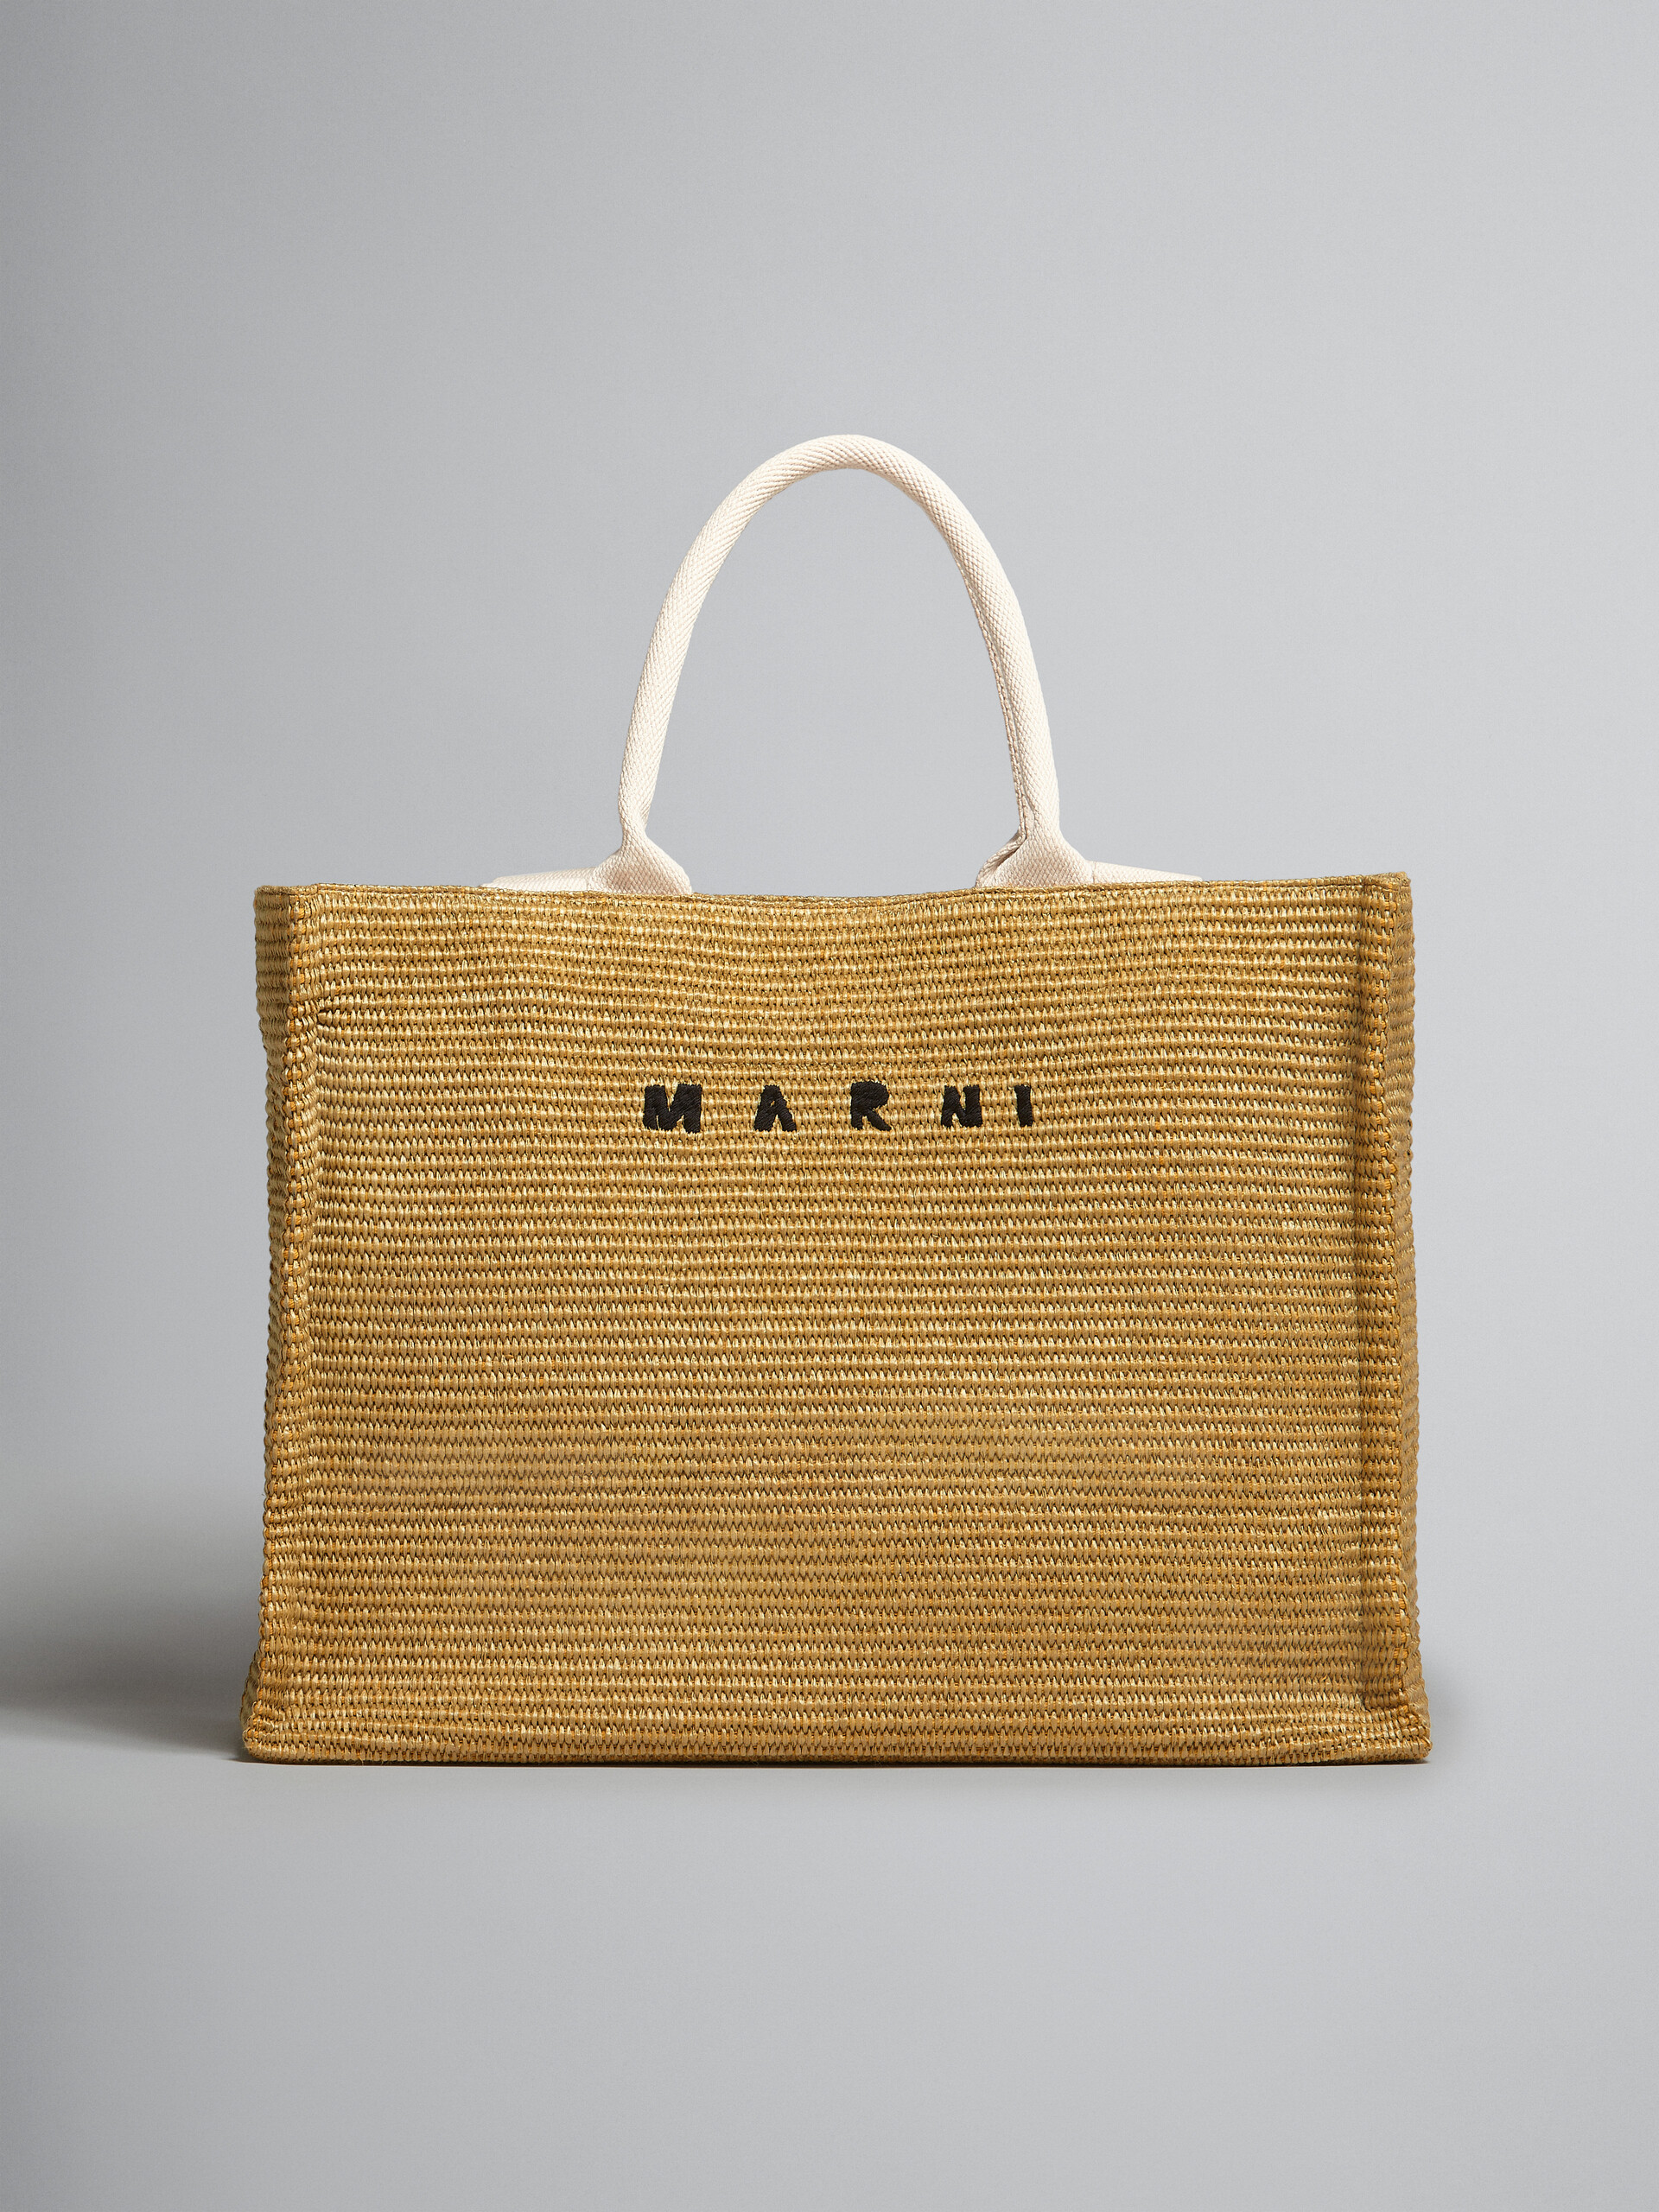 Large Tote in natural-coloured raffia-effect fabric - Shopping Bags - Image 1